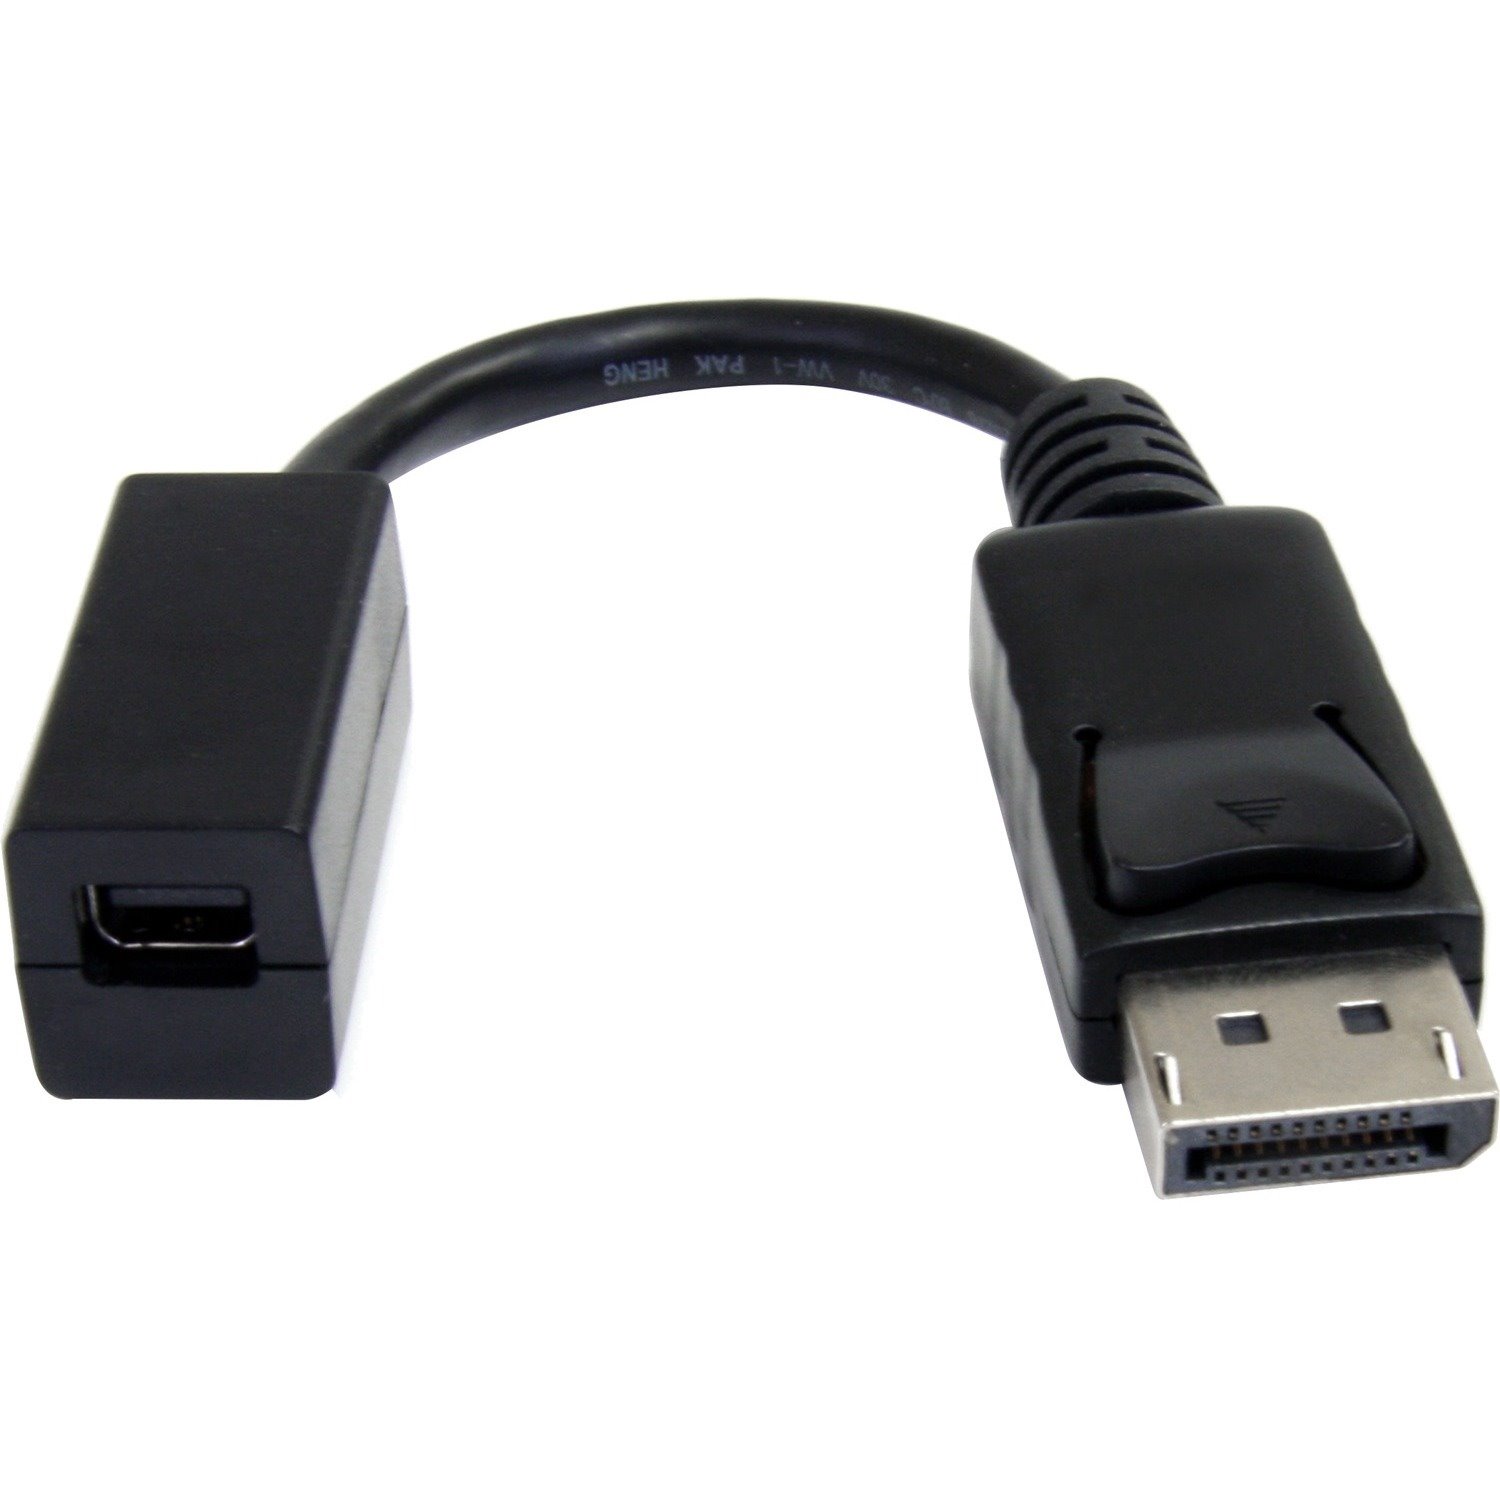 StarTech.com DP2MDPMF6IN 15.24 cm DisplayPort/Mini DisplayPort A/V Cable for Monitor, Notebook, Audio/Video Device, Computer